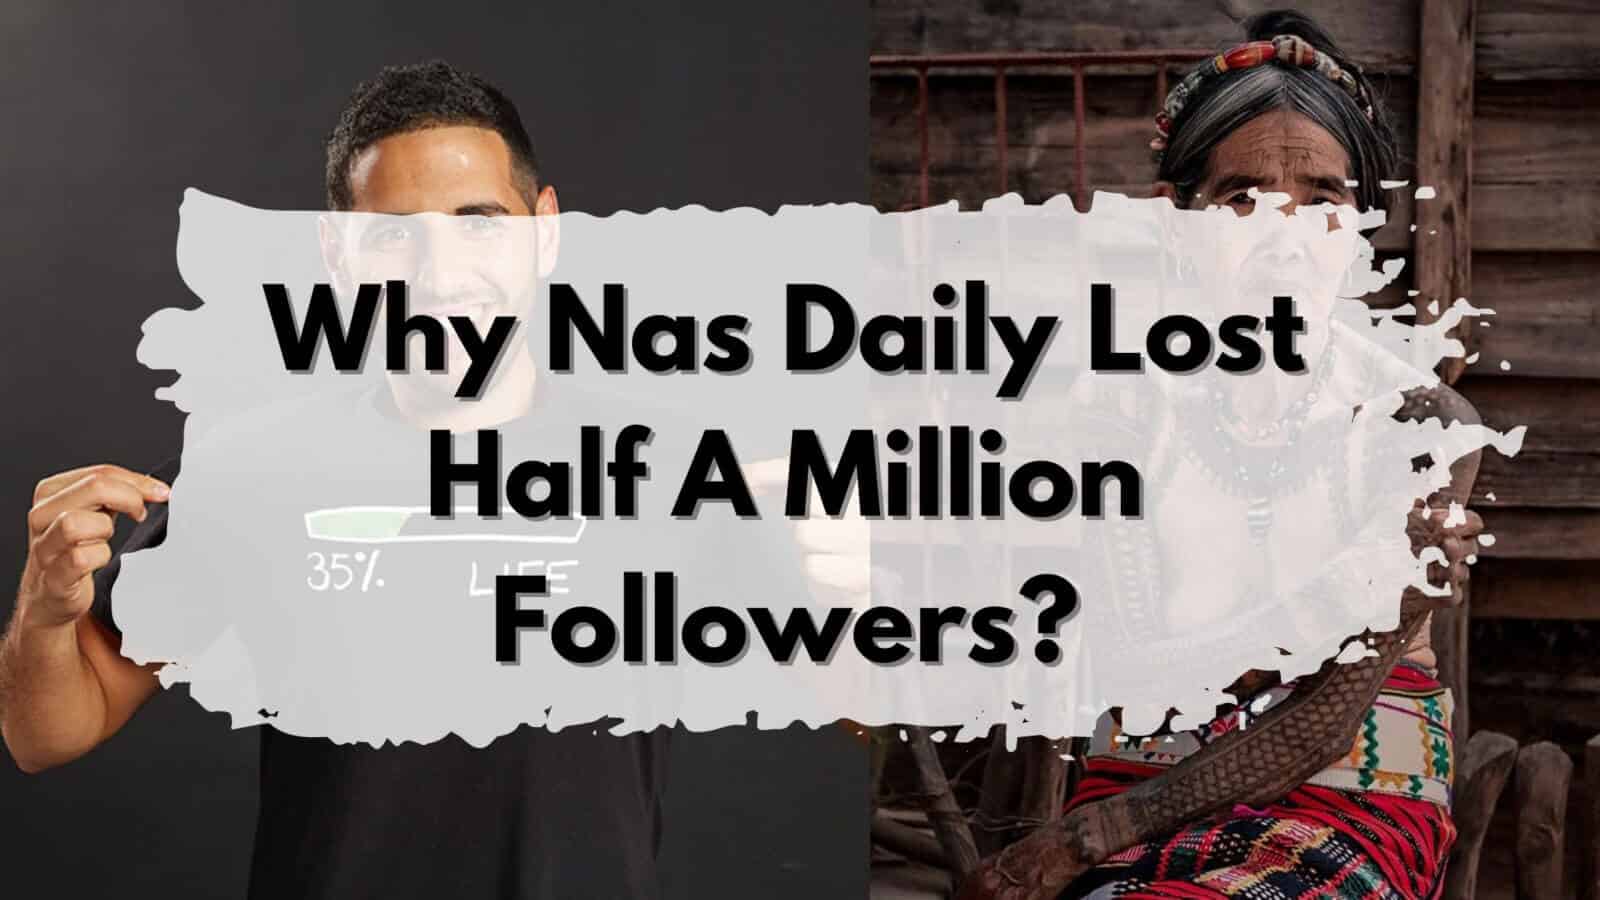 Nas Daily's loss of followers - half a million dropped.